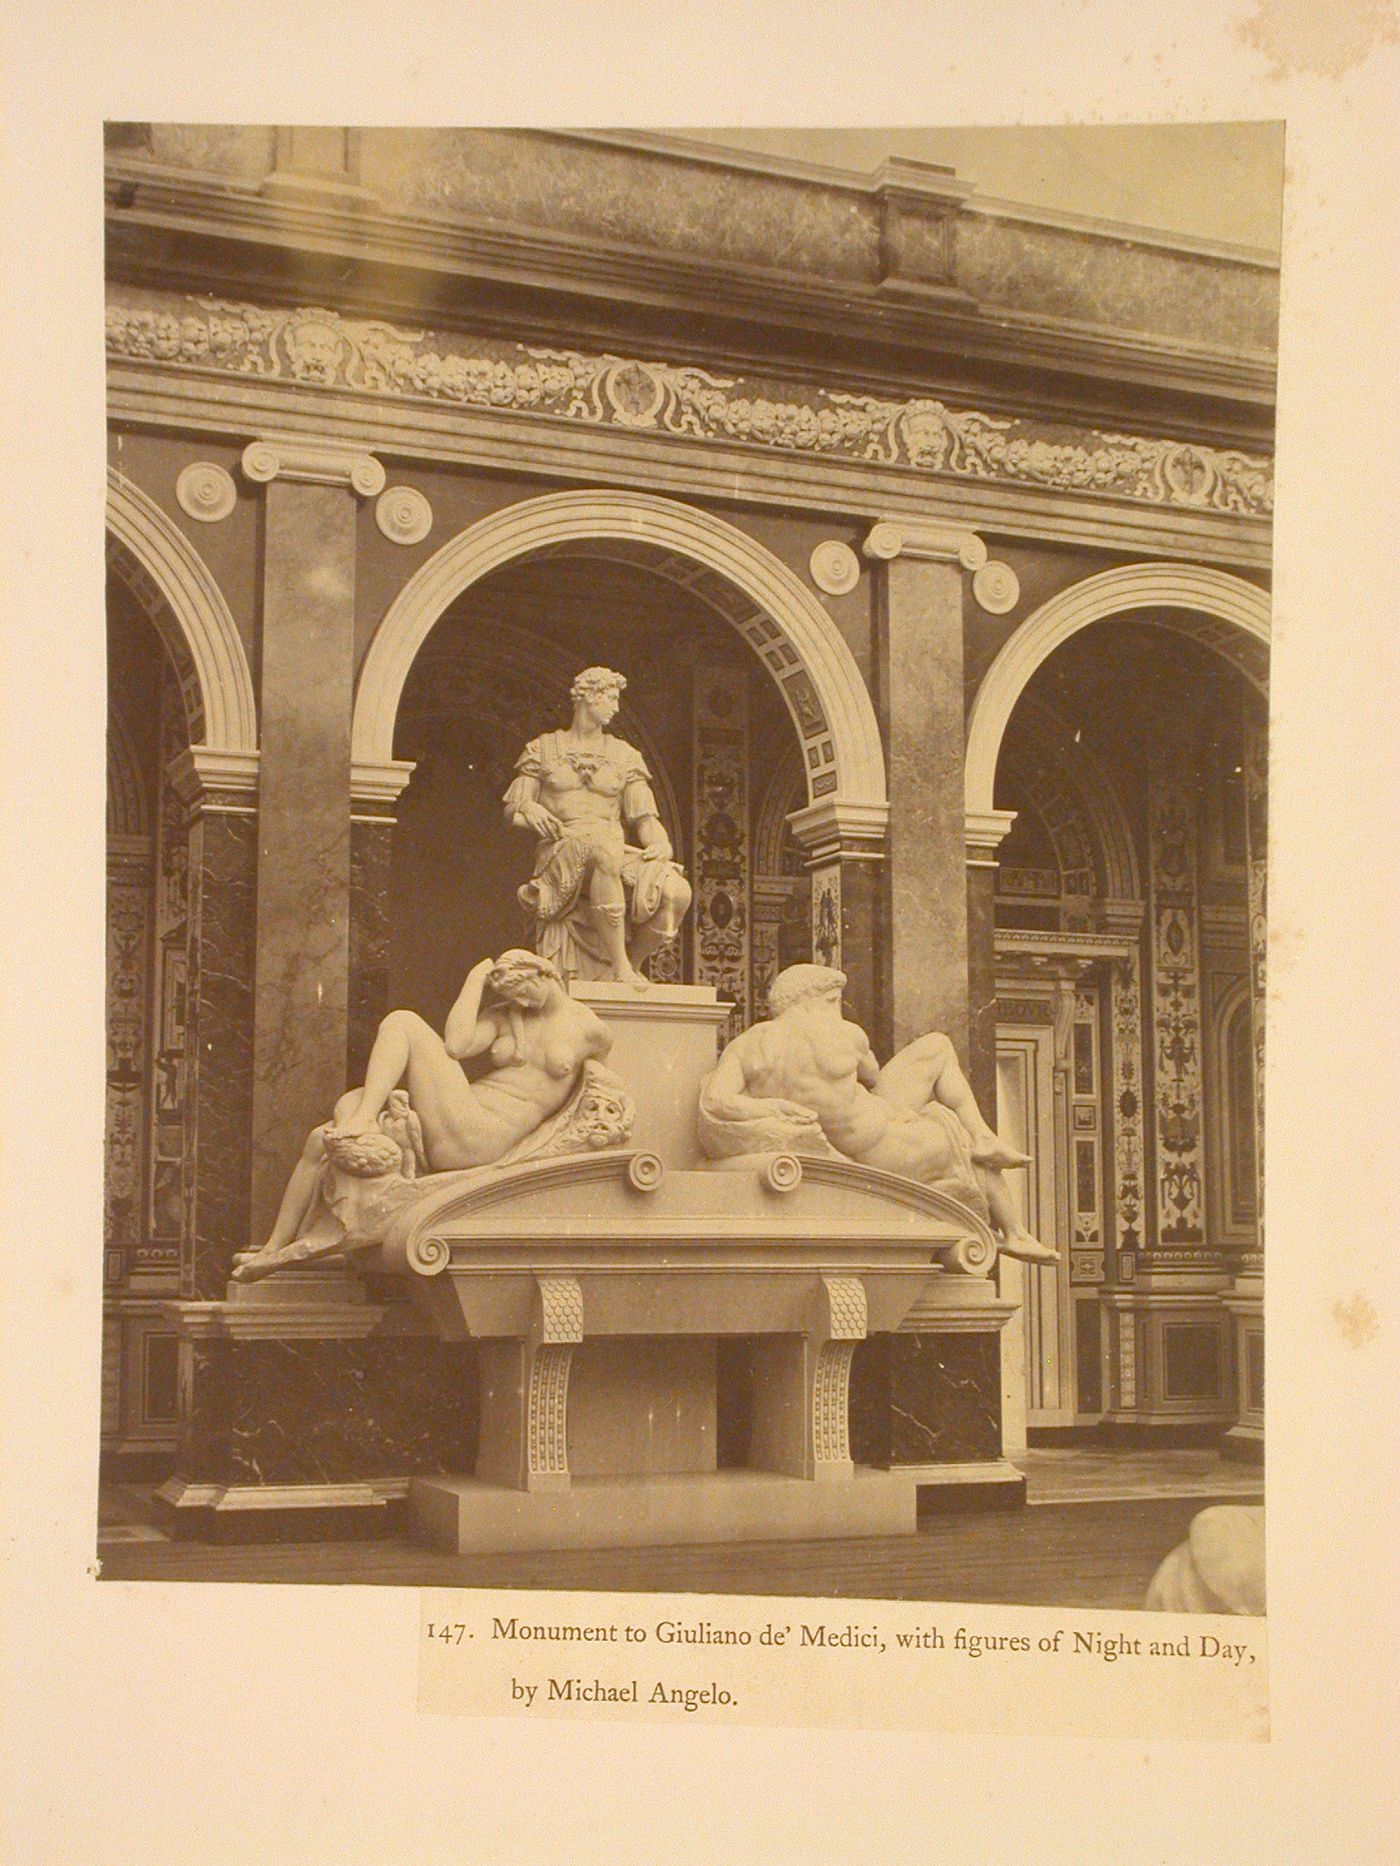 Monument to Giuliano de' Medici, with figures of Night and Day, by Michaelangelo, Crystal Palace, Sydenham, England